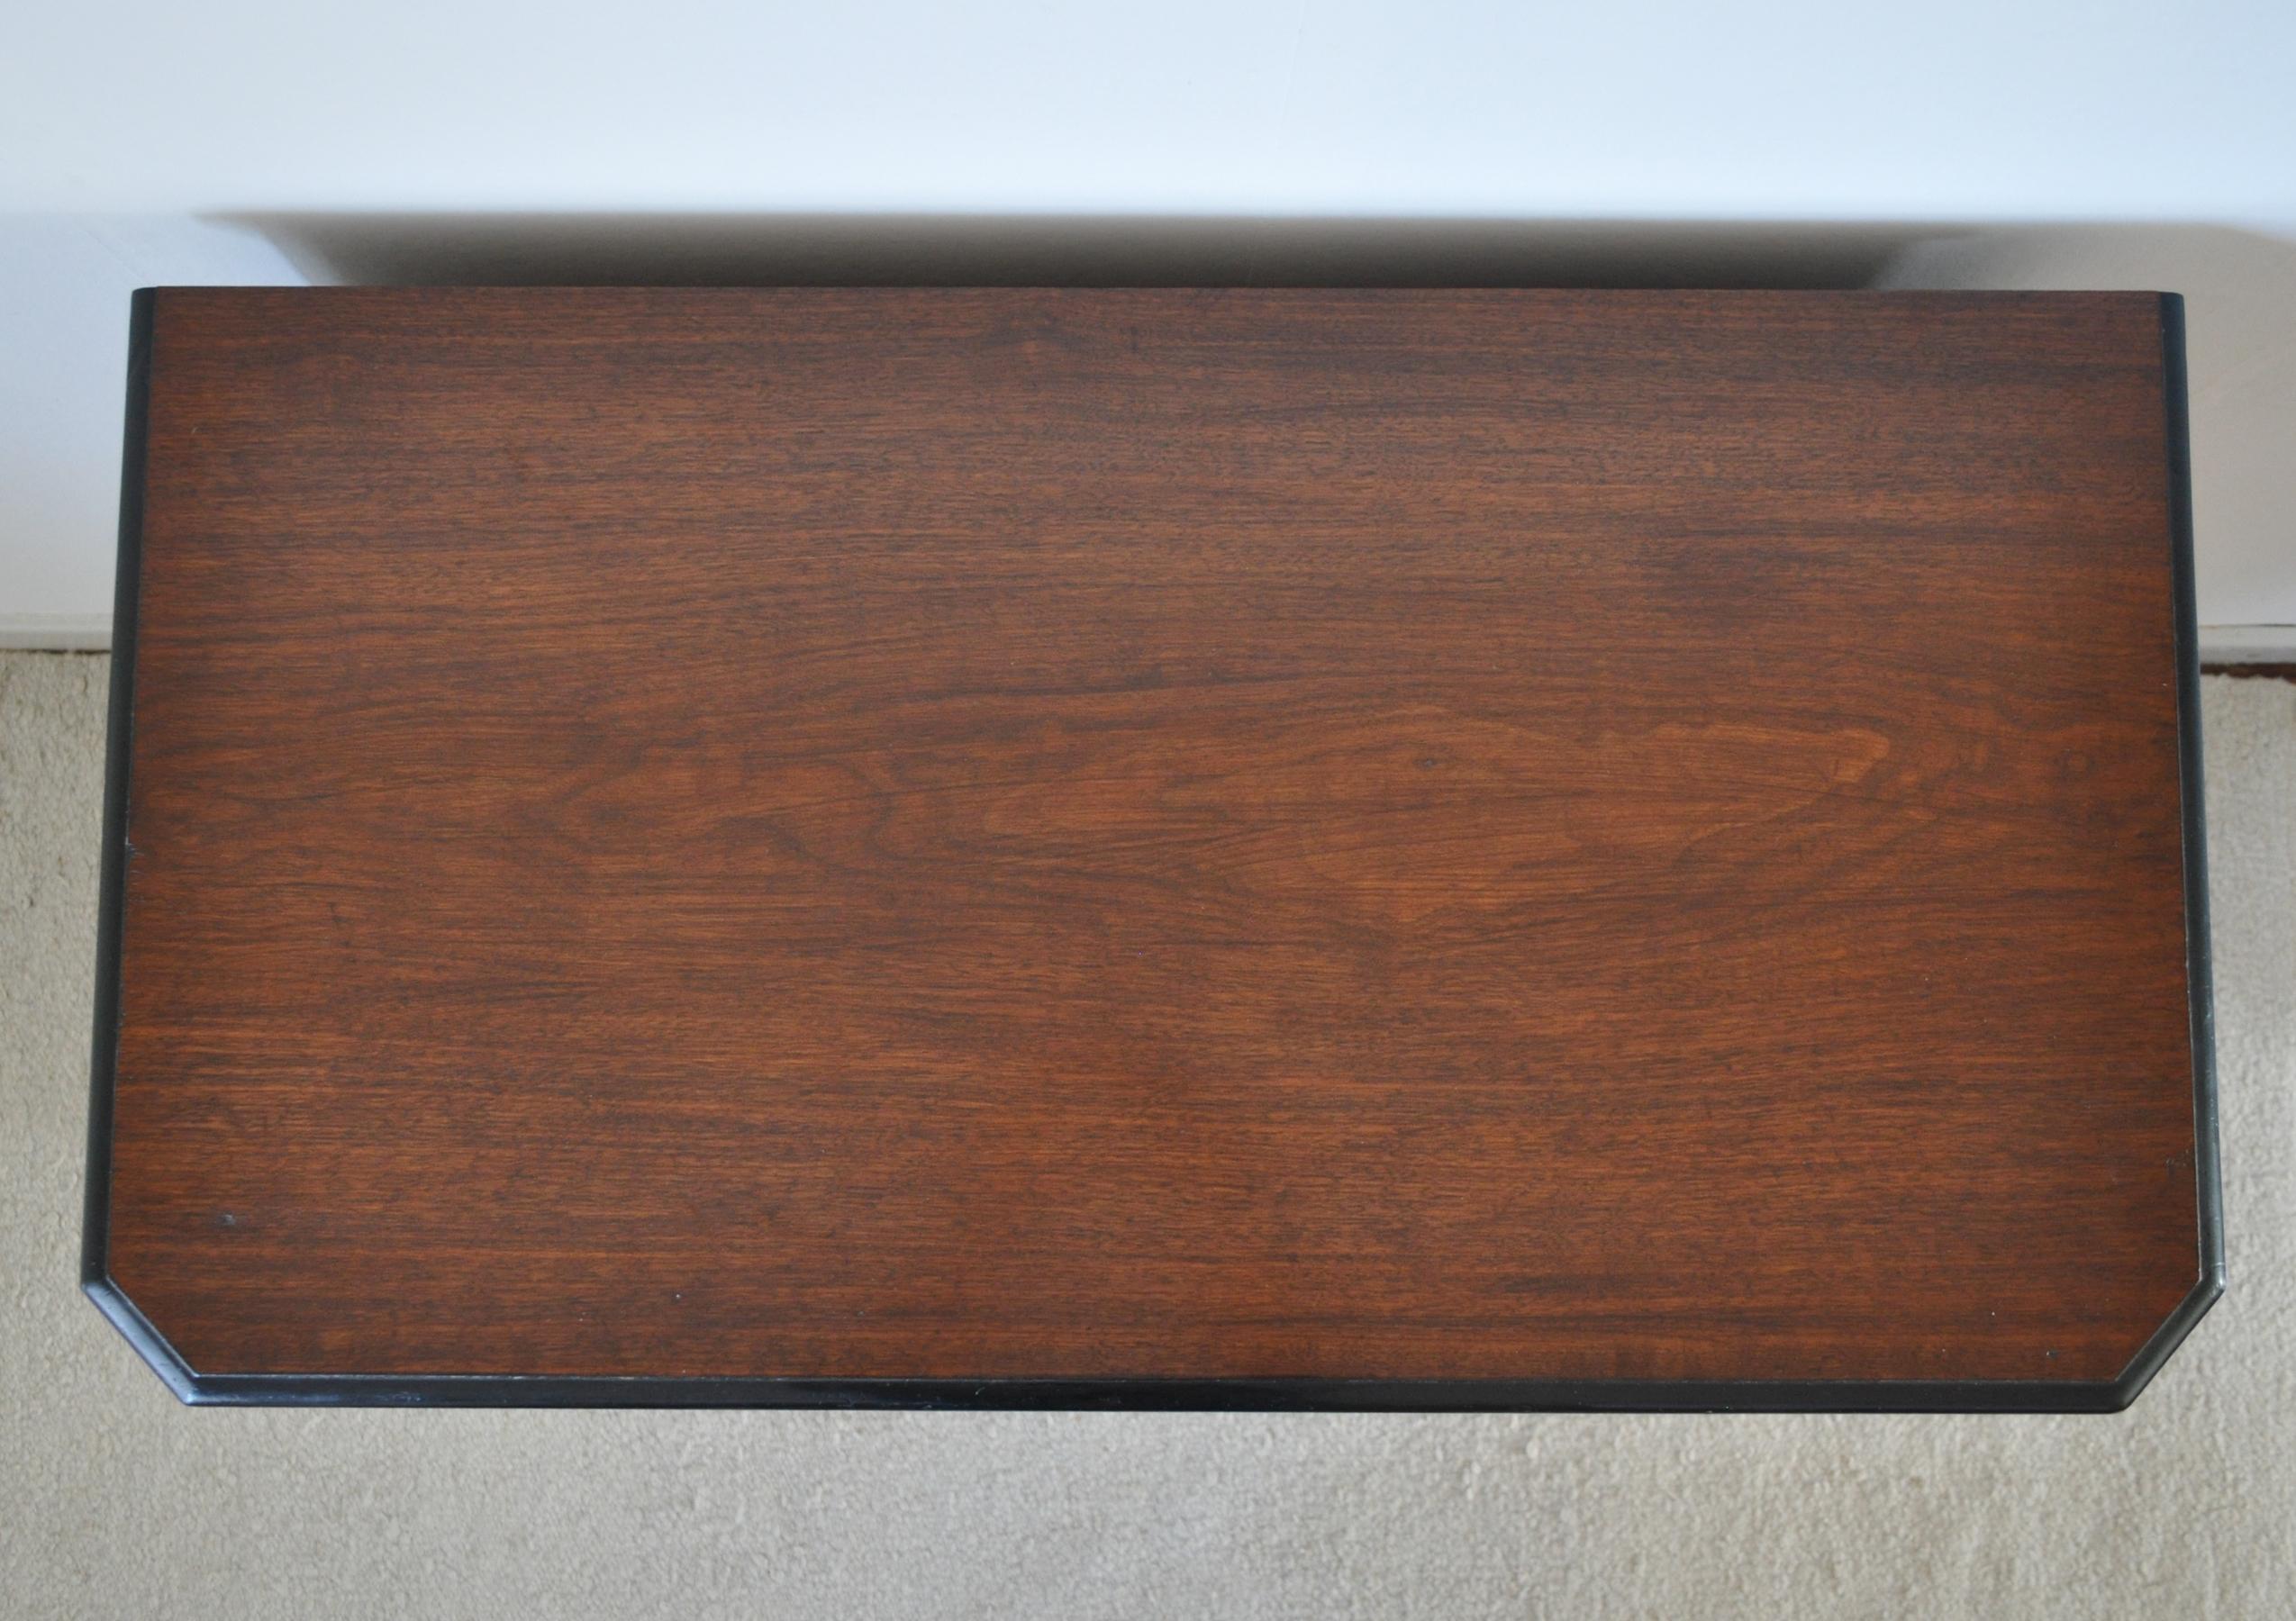 Antique Scandinavian Chest of Drawers in Walnut & Mahogany with Ebonized Details For Sale 12